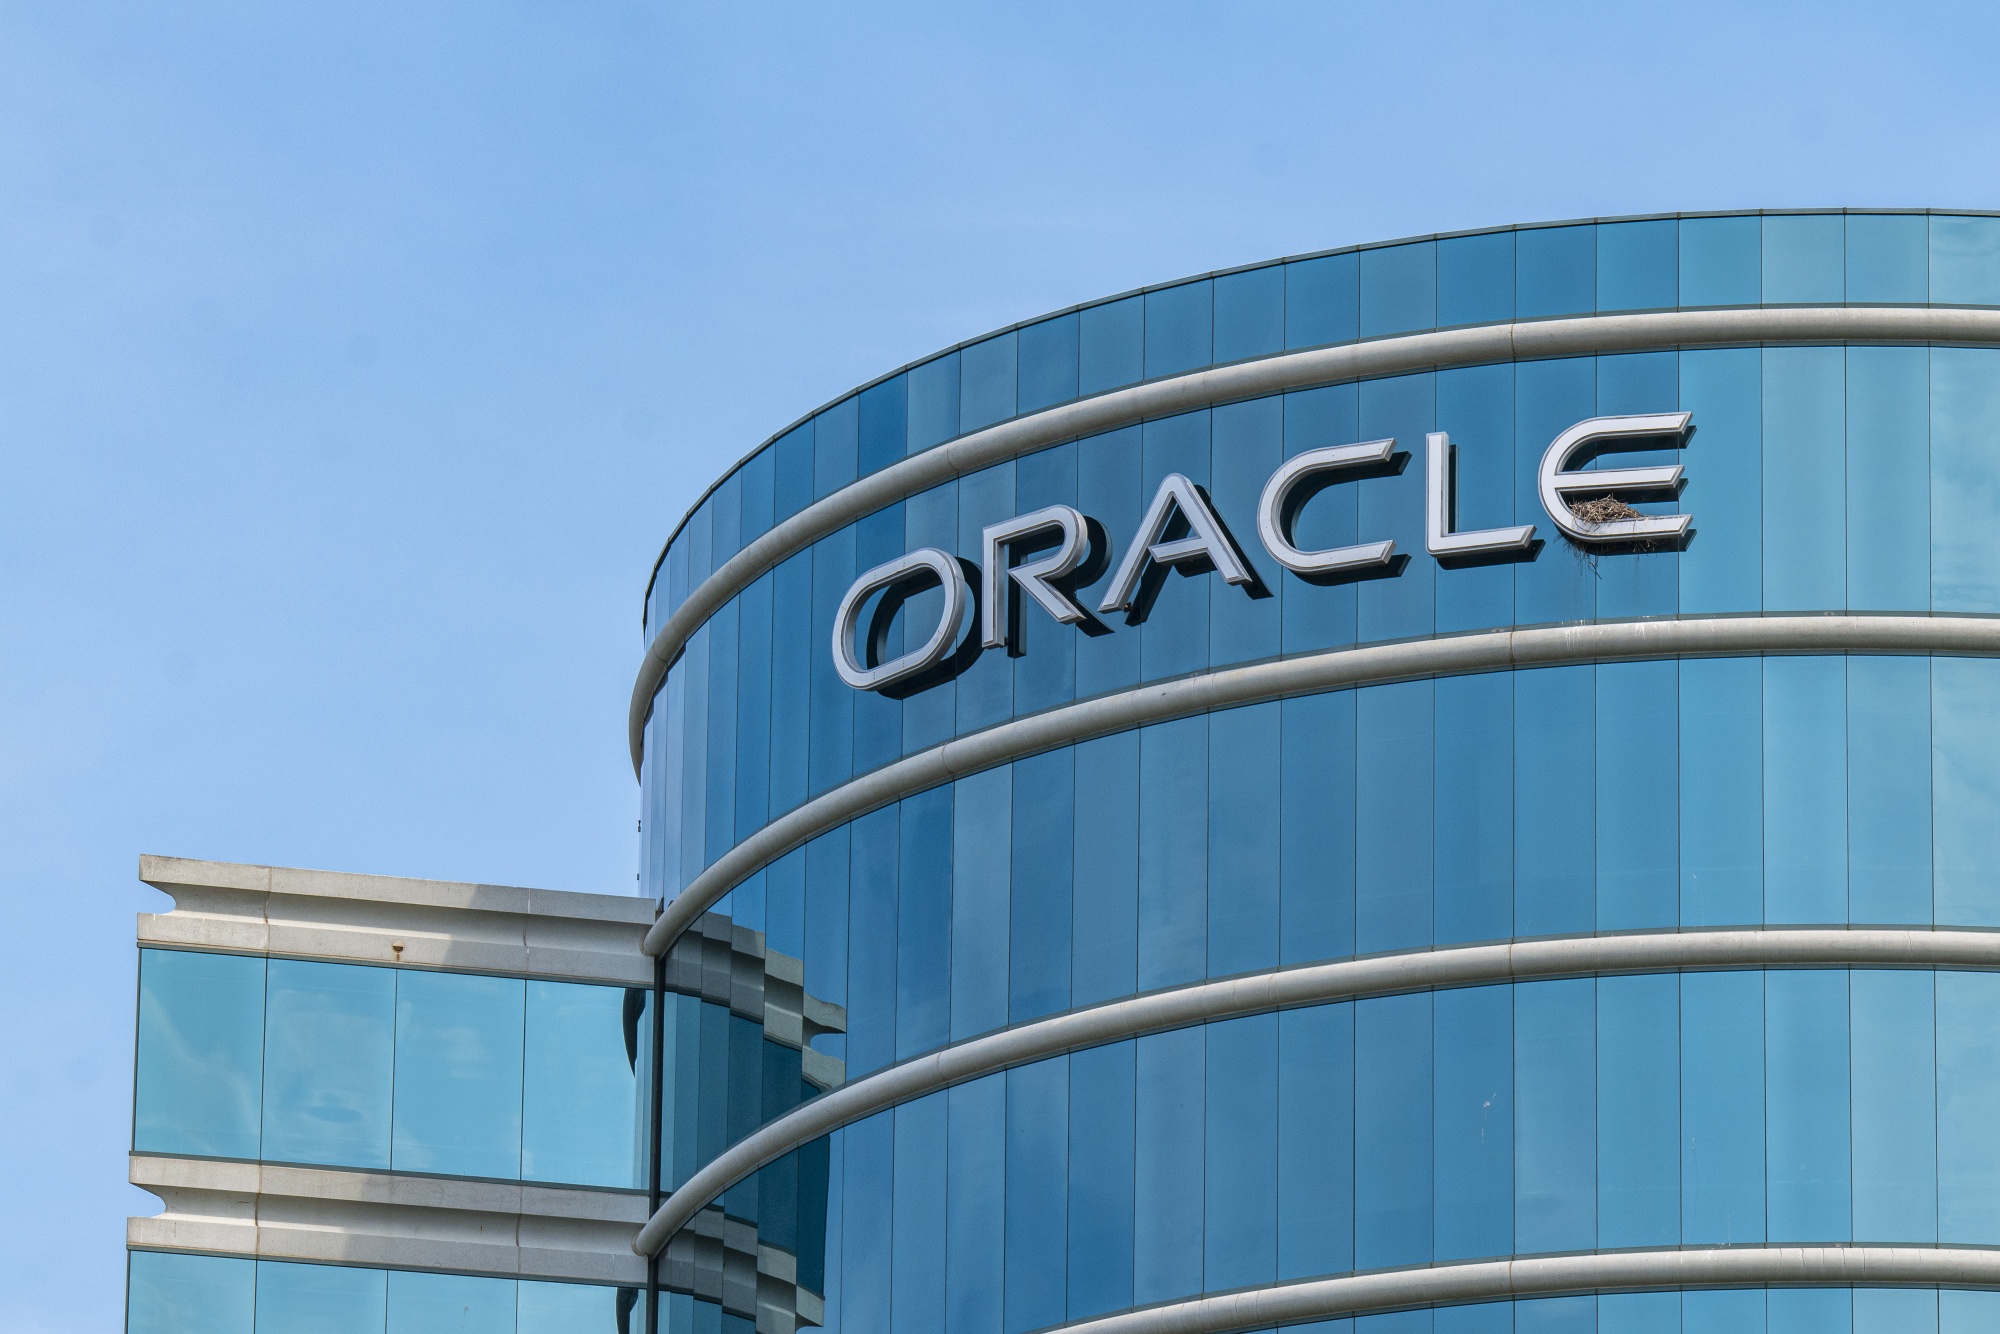 Oracle Women Stumble in Pay Bias Suit While Google Cuts a Deal - Bloomberg